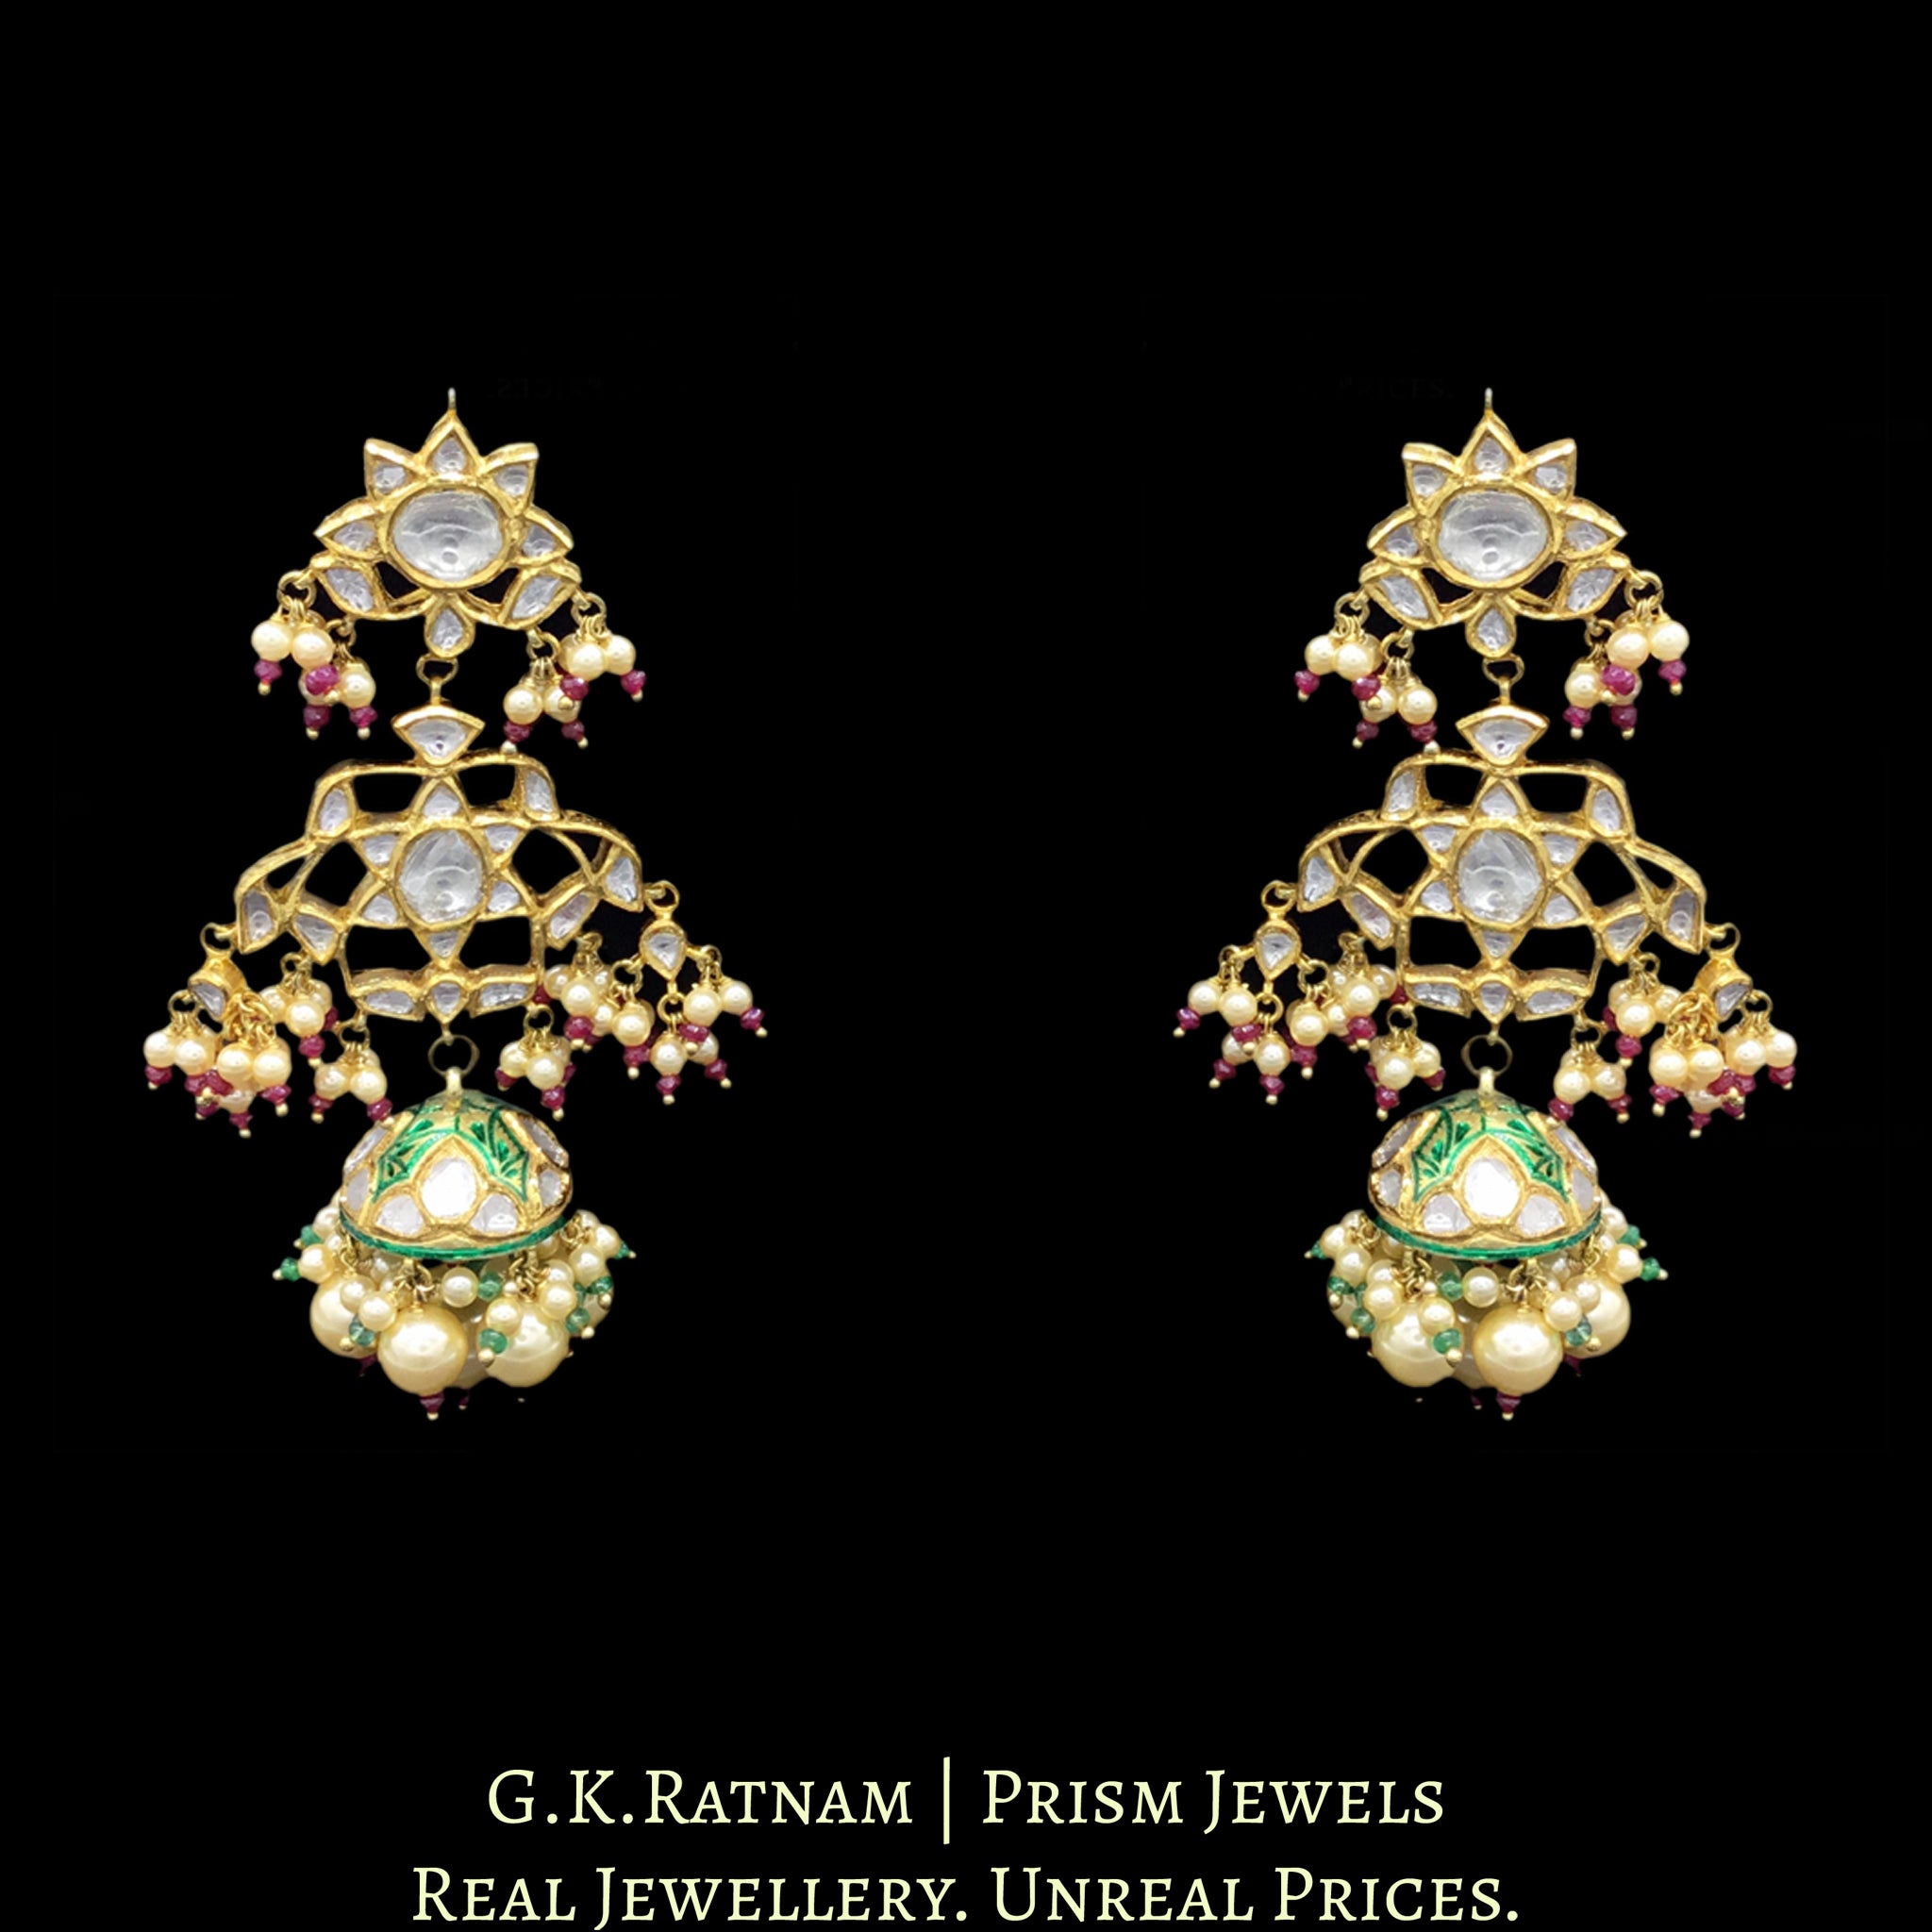 18k Gold and Diamond Polki Rajpooti Aad Choker Necklace Set with Natural Emeralds and Rubies - G. K. Ratnam